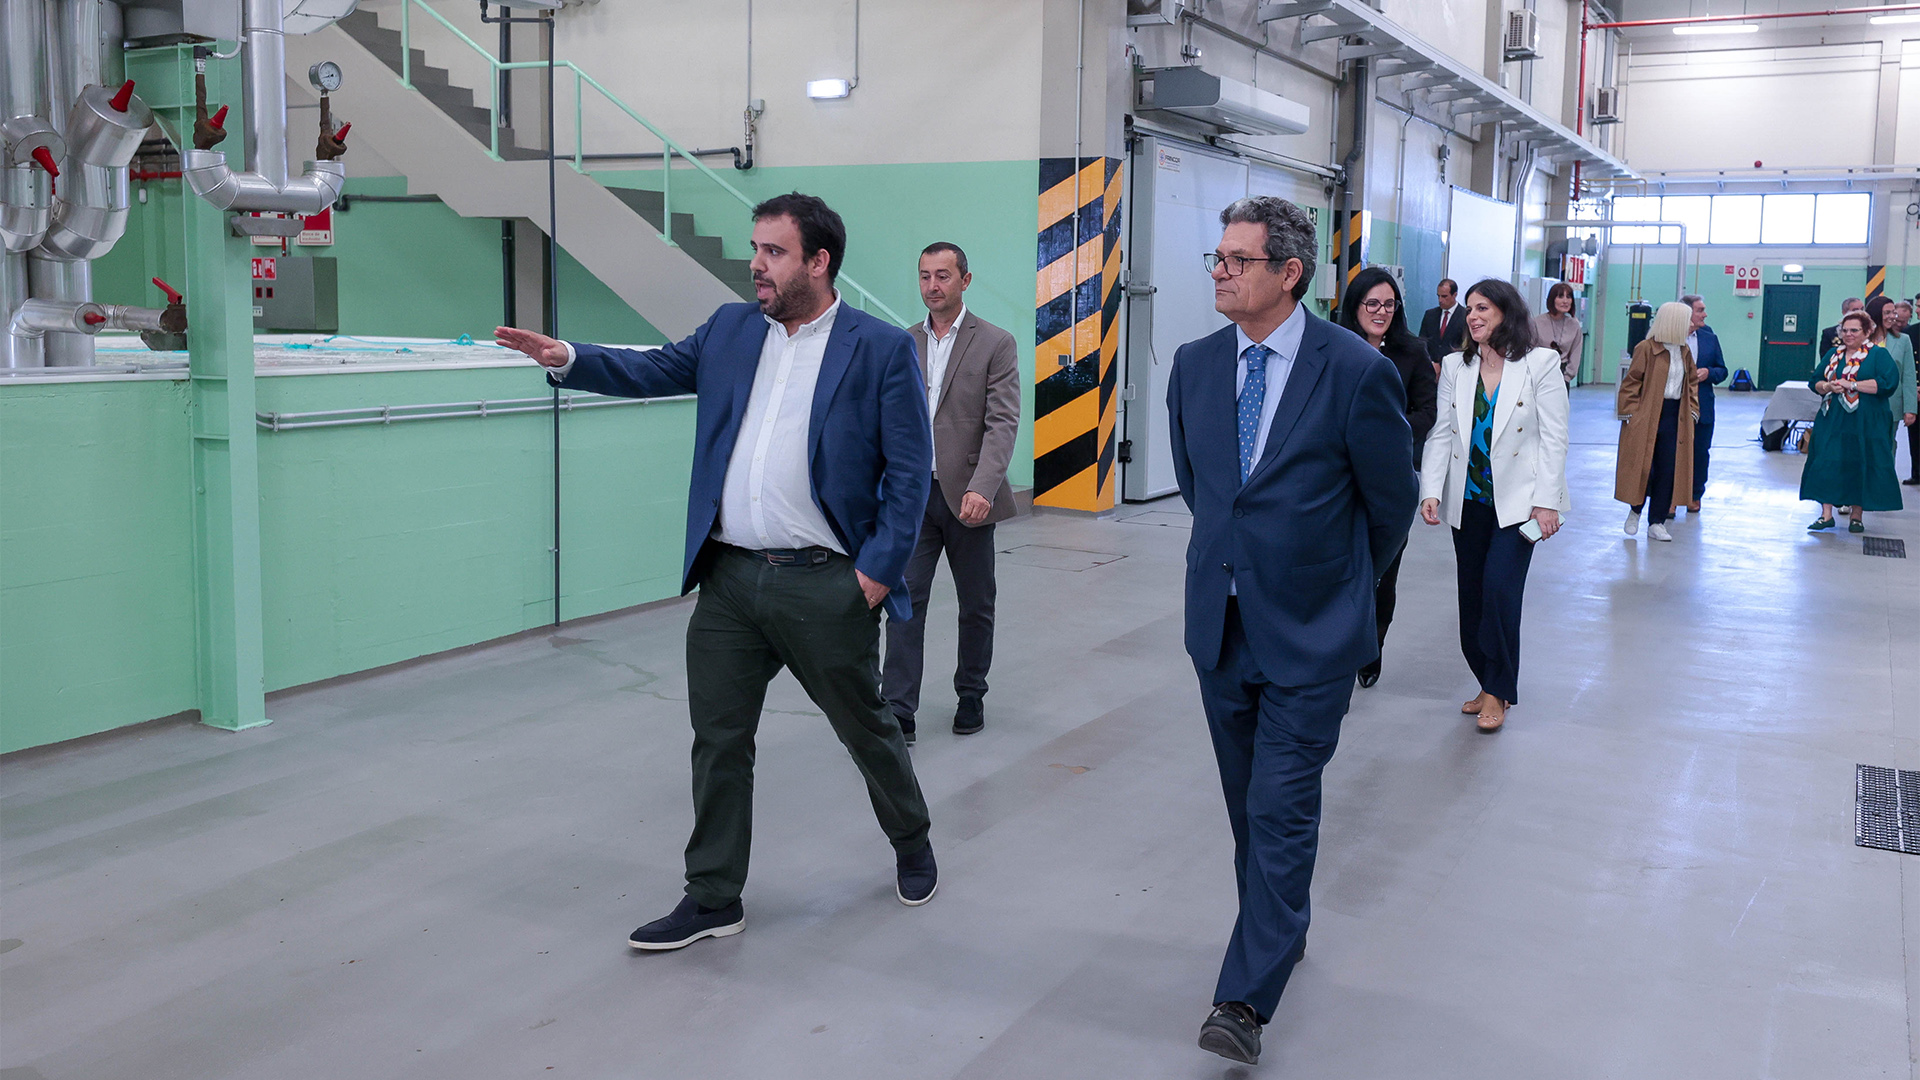 Refurbishment of Madalena cold storage is joyous day for fisheries sector, stresses Mário Rui Pinho